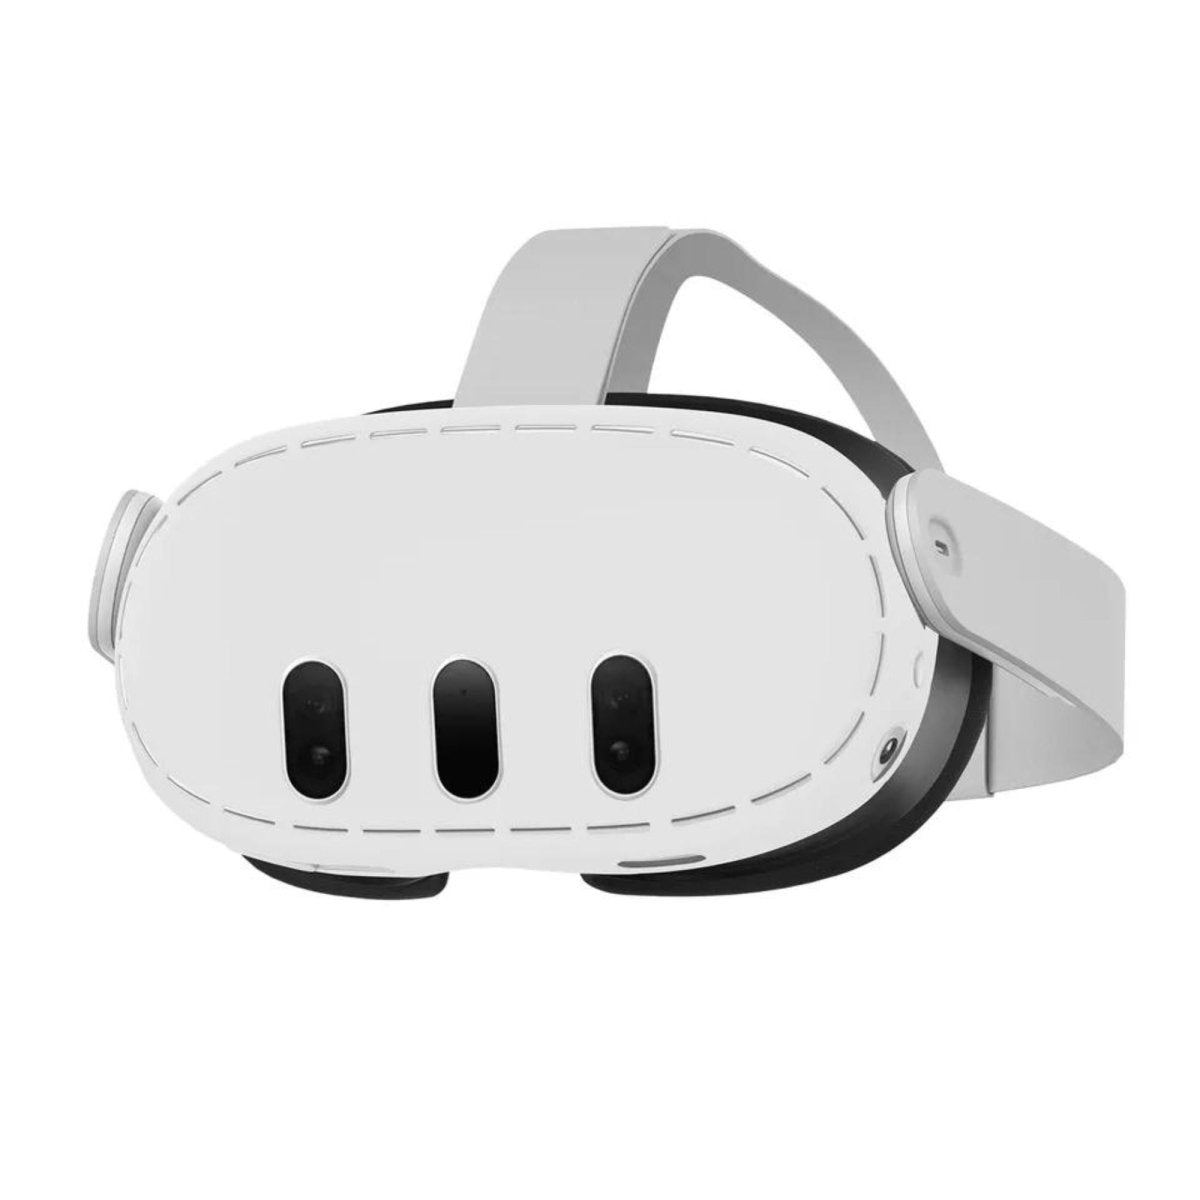 Meta Quest 3 VR Headset: Pricing, Where to Pre-Order Online